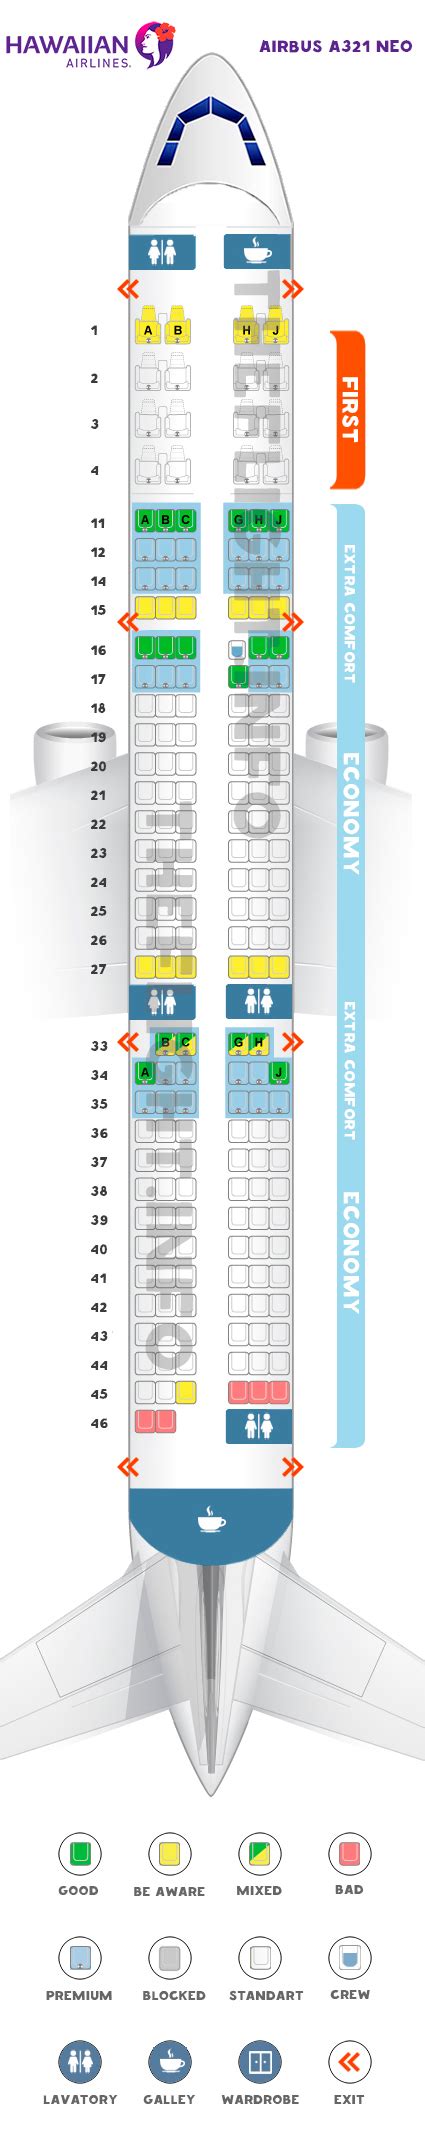 Which Are The Best Standard Seats On An Airbus A321neo Kade Has Duffy